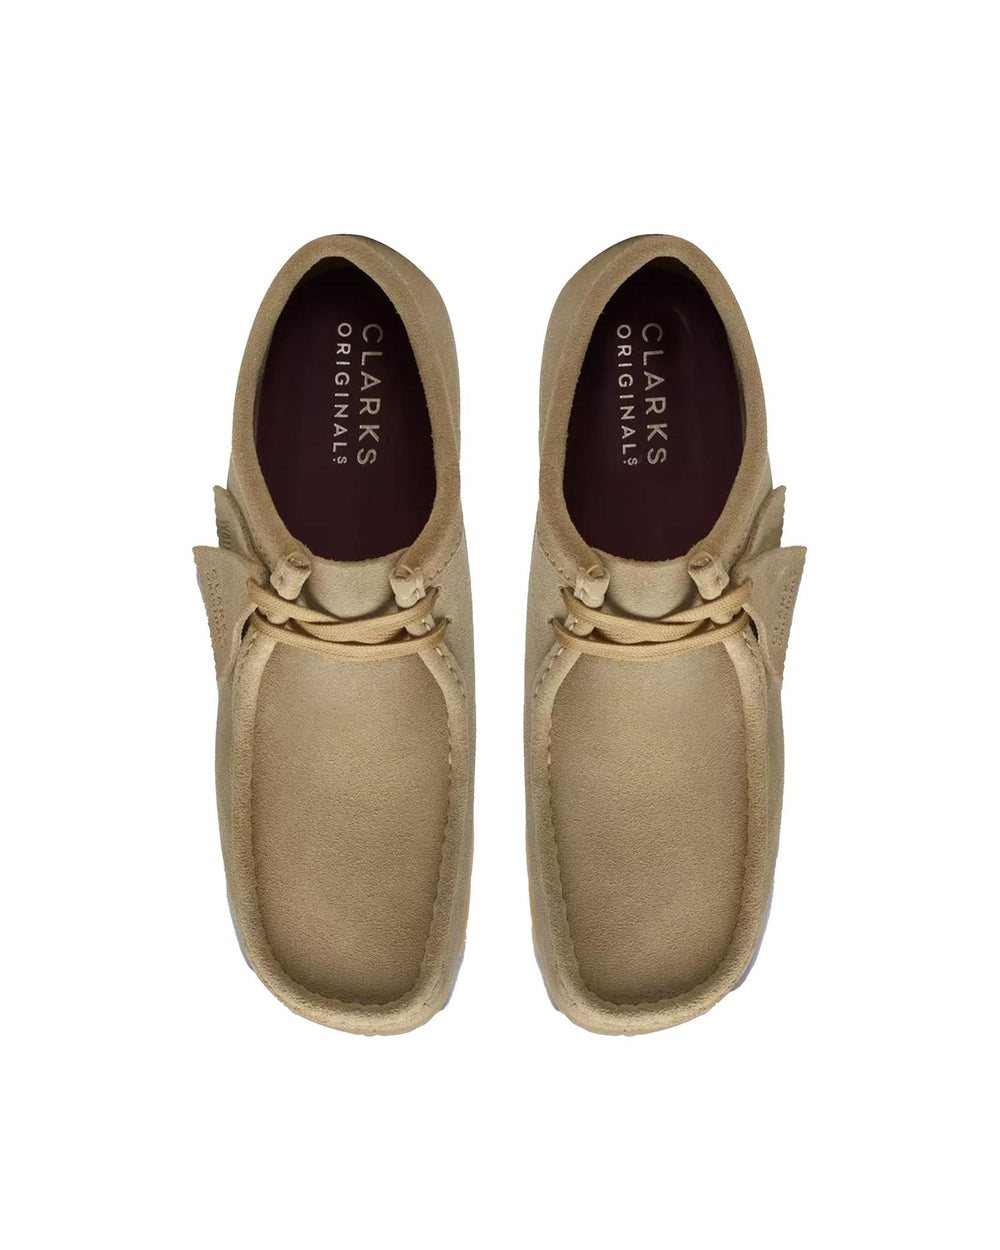 Clarks Wallabee Maple Suede | STASHED